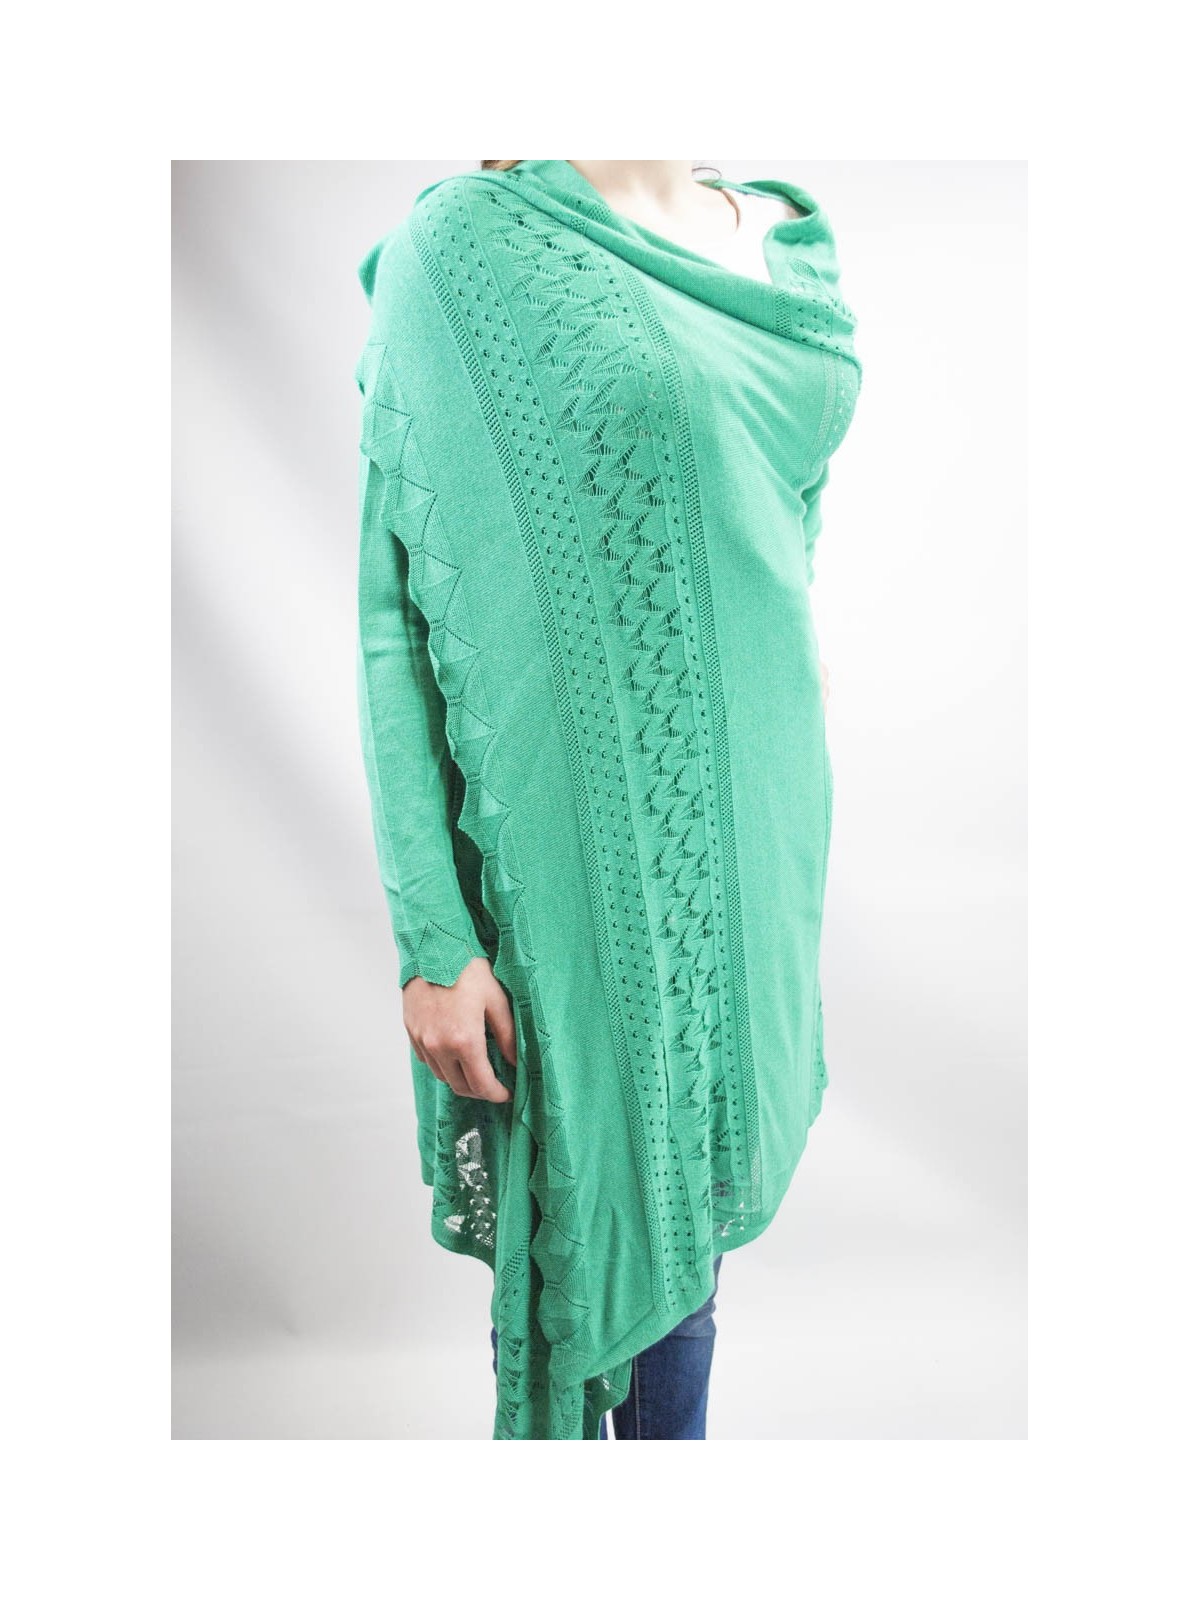 Duster Sweater Women's Large Long Emerald Green - Cotton and Linen - Spring-Summer